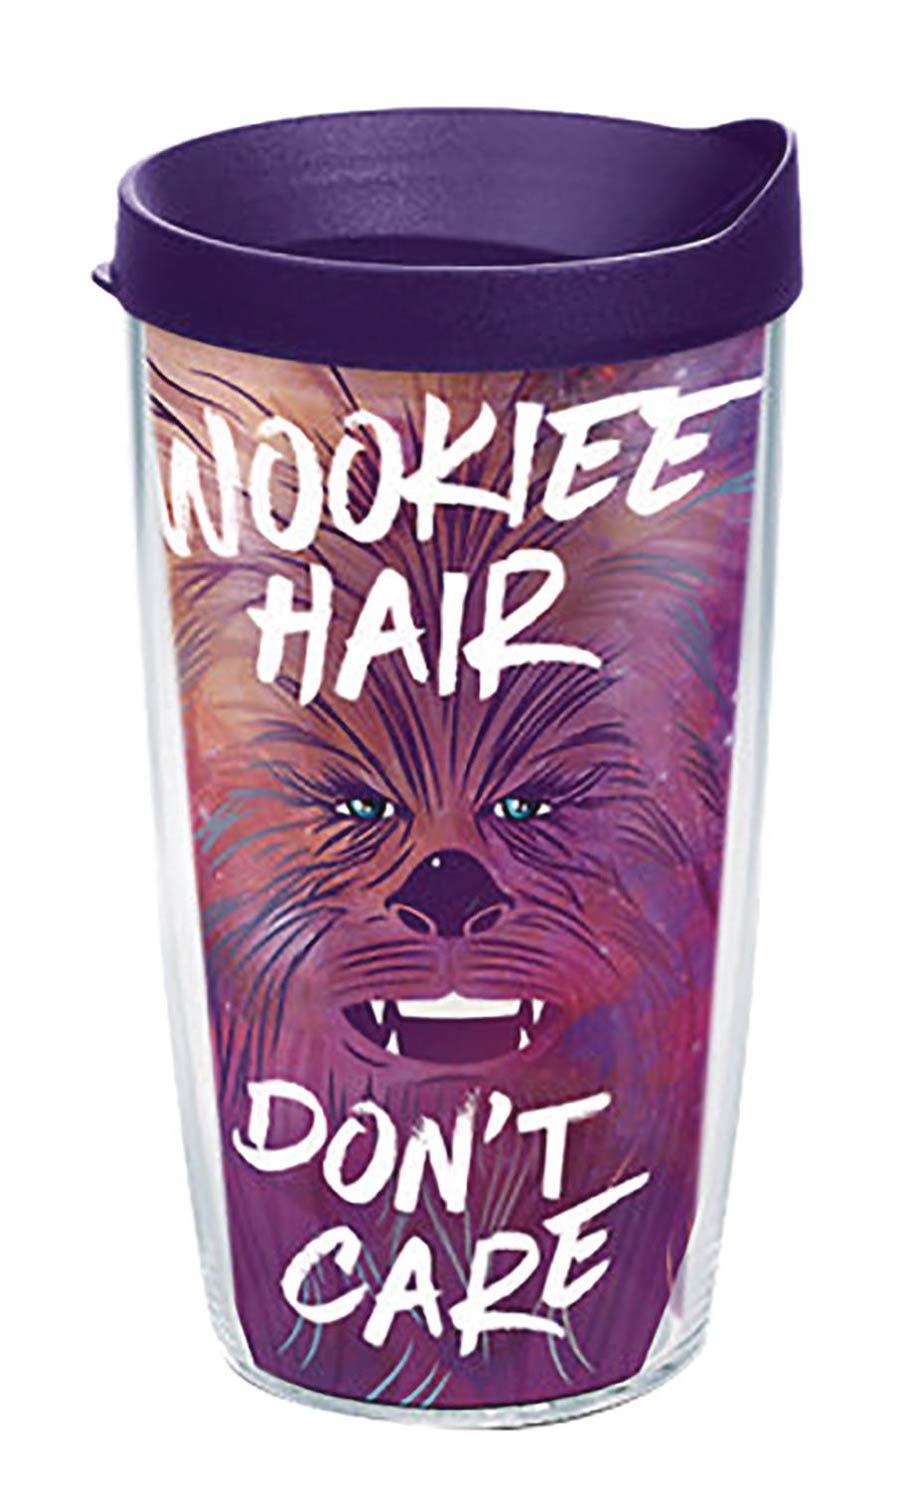 Star Wars Wookie Hair Dont Care 16-Ounce Tumbler